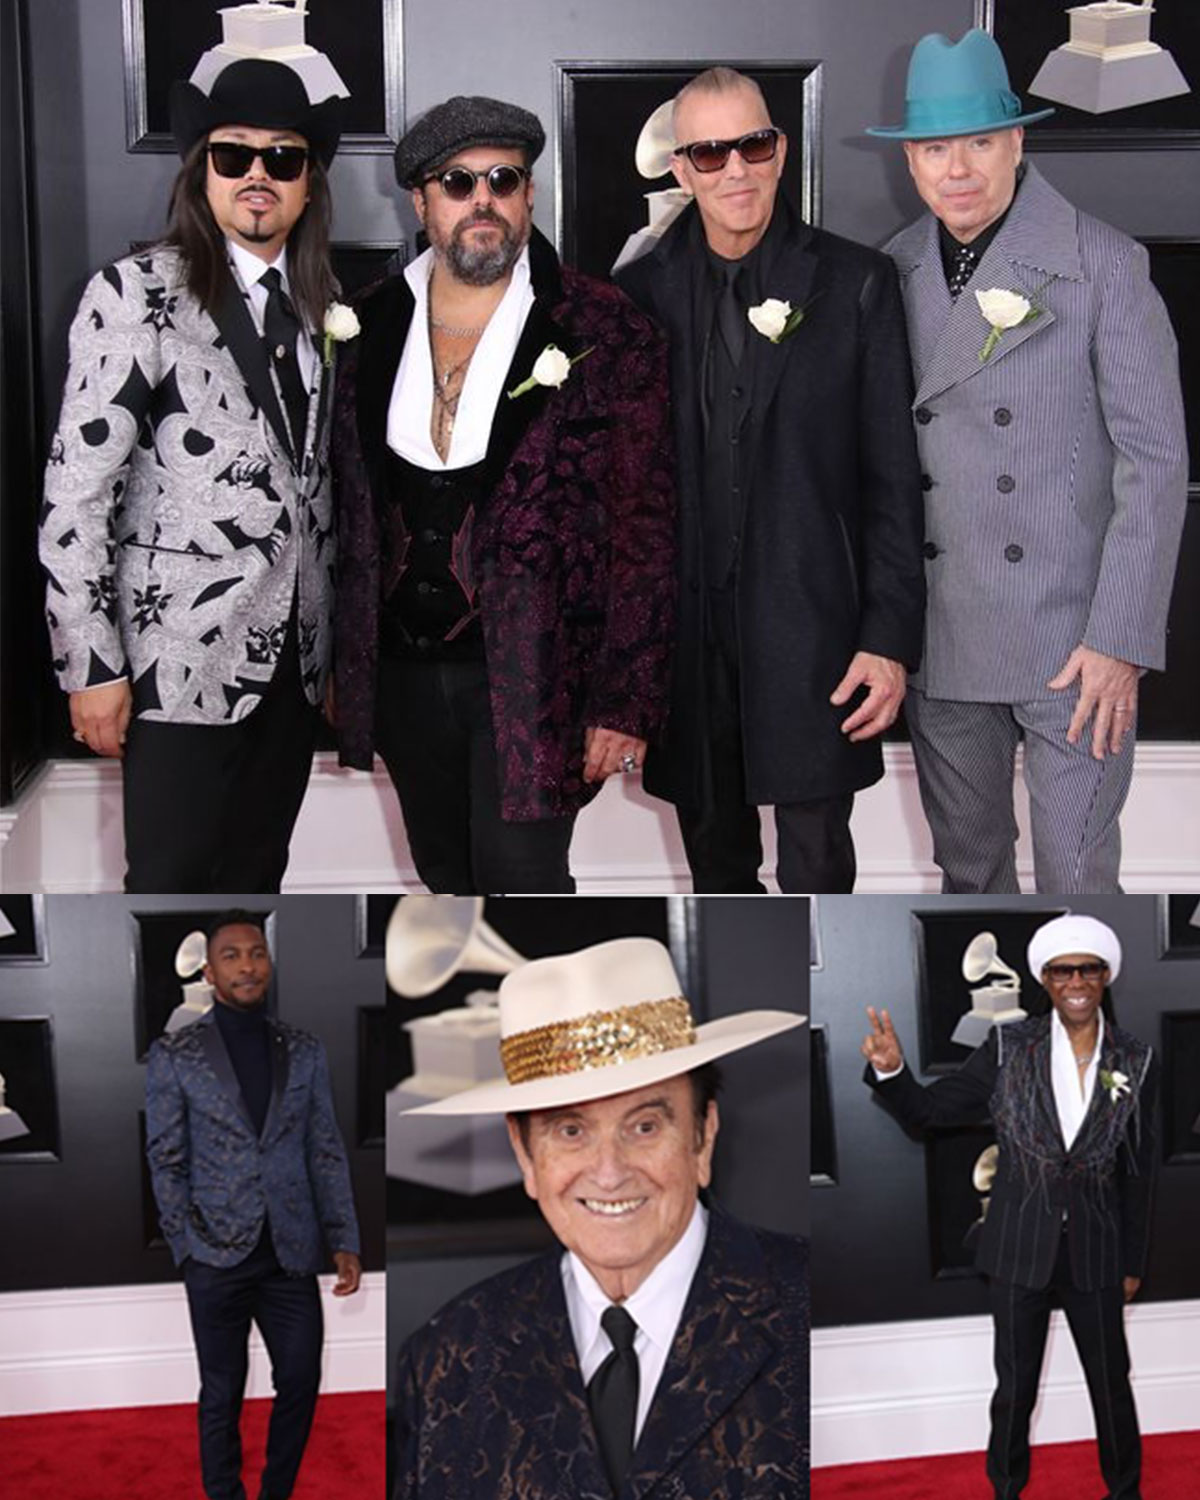 Grammy Award 2018 grammy award 2018 - 2 - Grammy Award 2018 &#8211; Men that rocked the red carpet